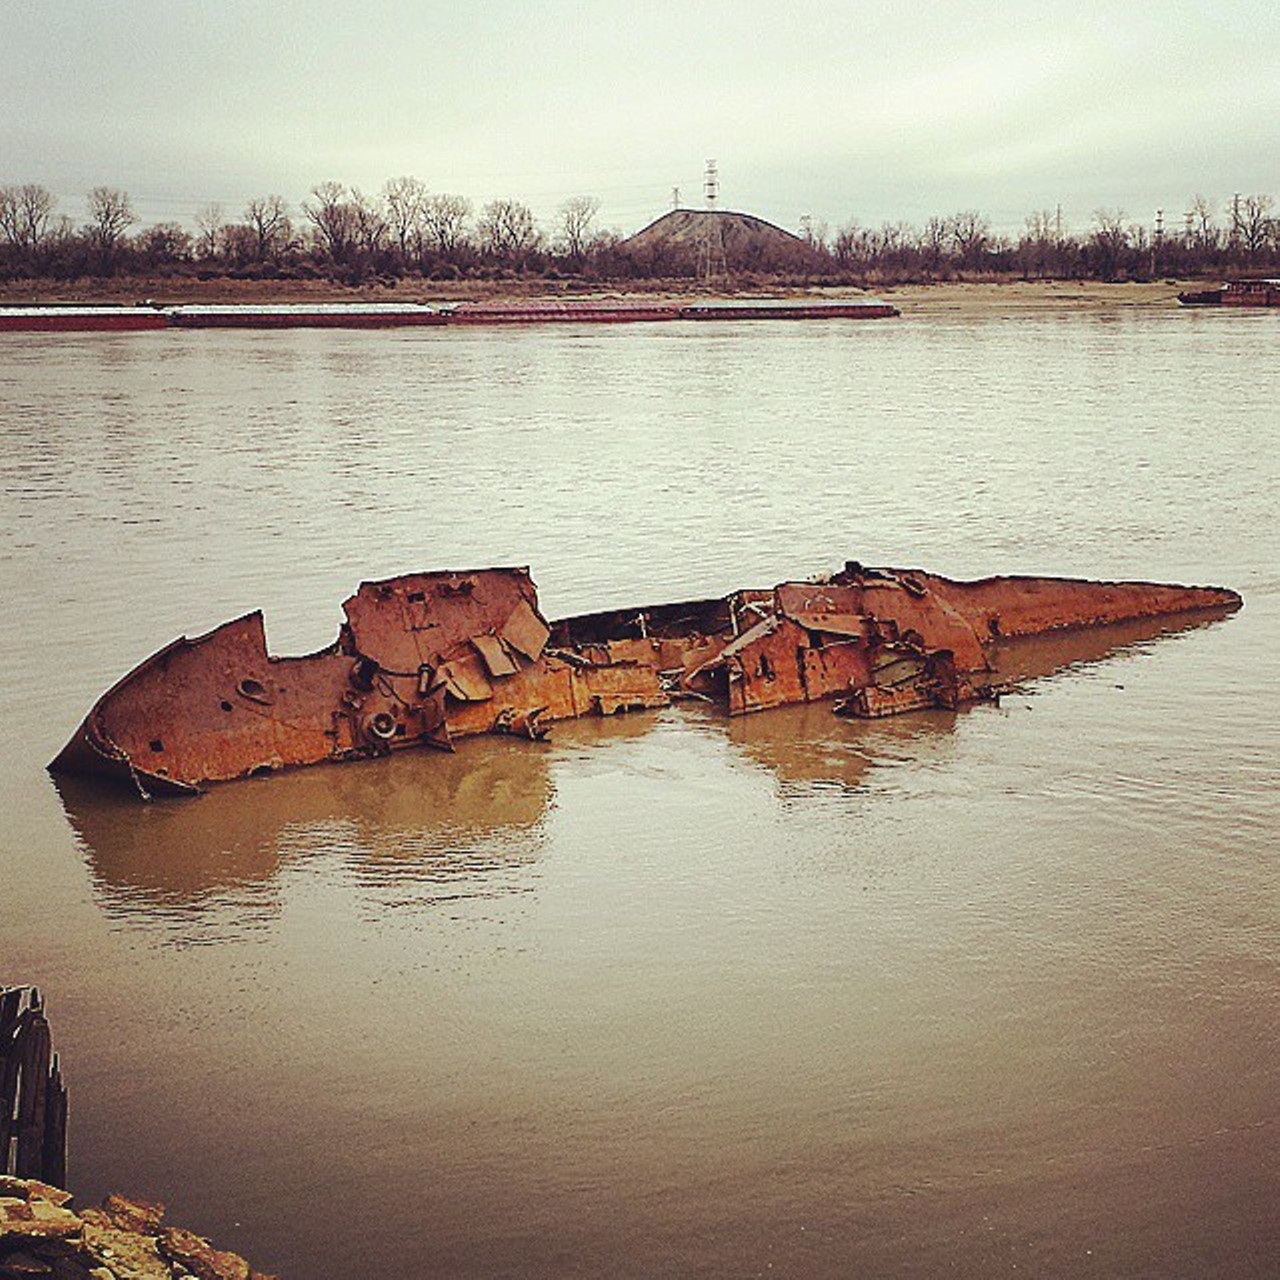 Wreckage Of The USS Inaugural
Rutger St., St. Louis, MO
This mine sweeper was a museum ship in St. Louis until the flood of '93, when it was swept downriver. It's now stuck to the side of the river in south city and you can visit it when the water level is low.
Photo courtesy of bigb80 / Instagram